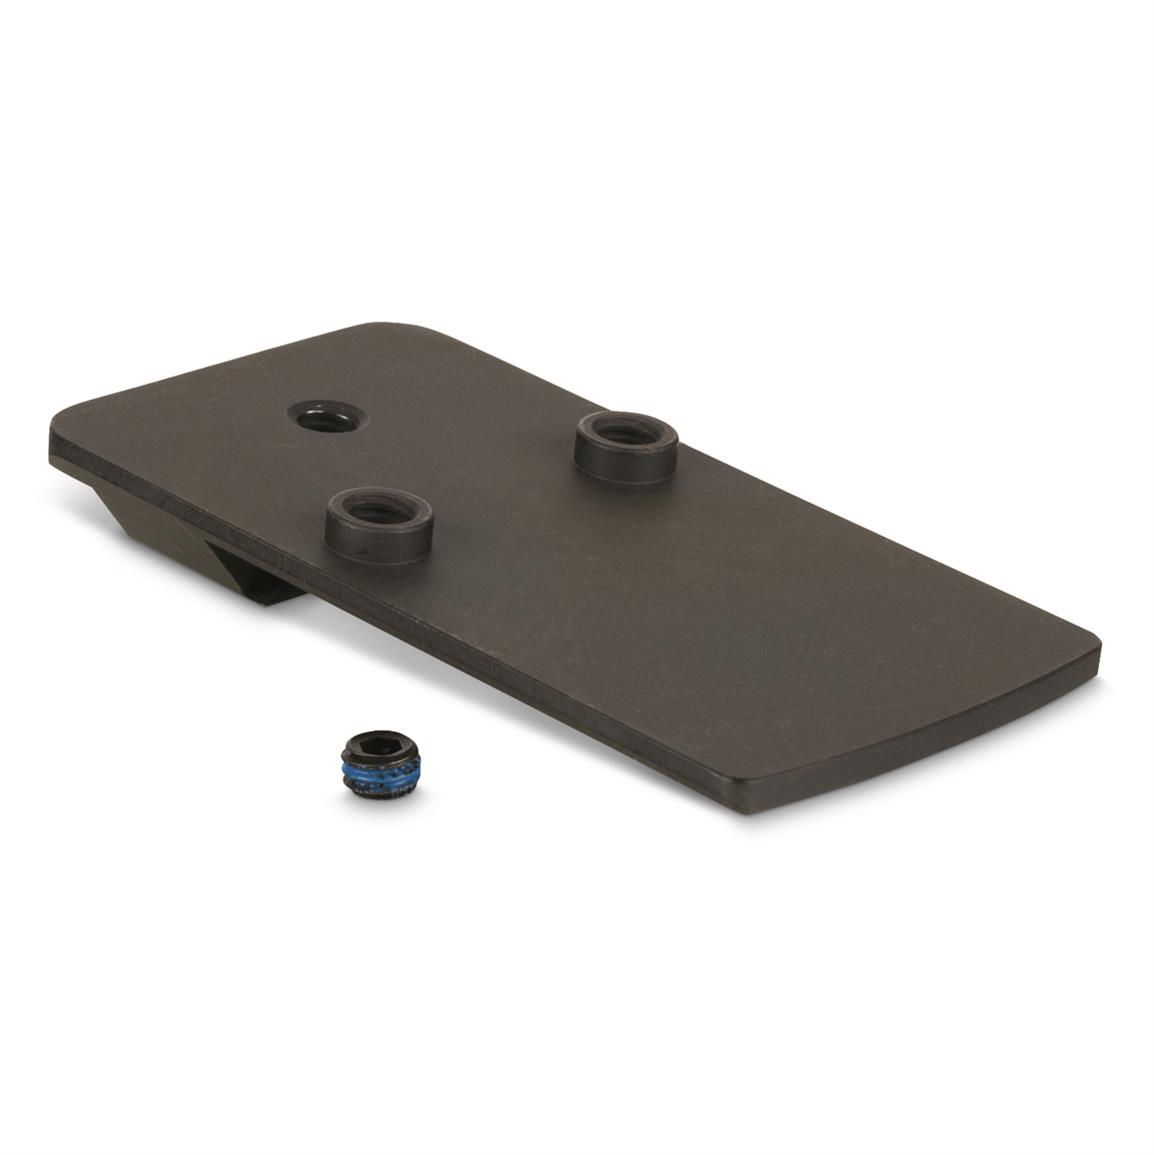 Trijicon RMRcc Dovetail Mount for Walther PPS Pistol